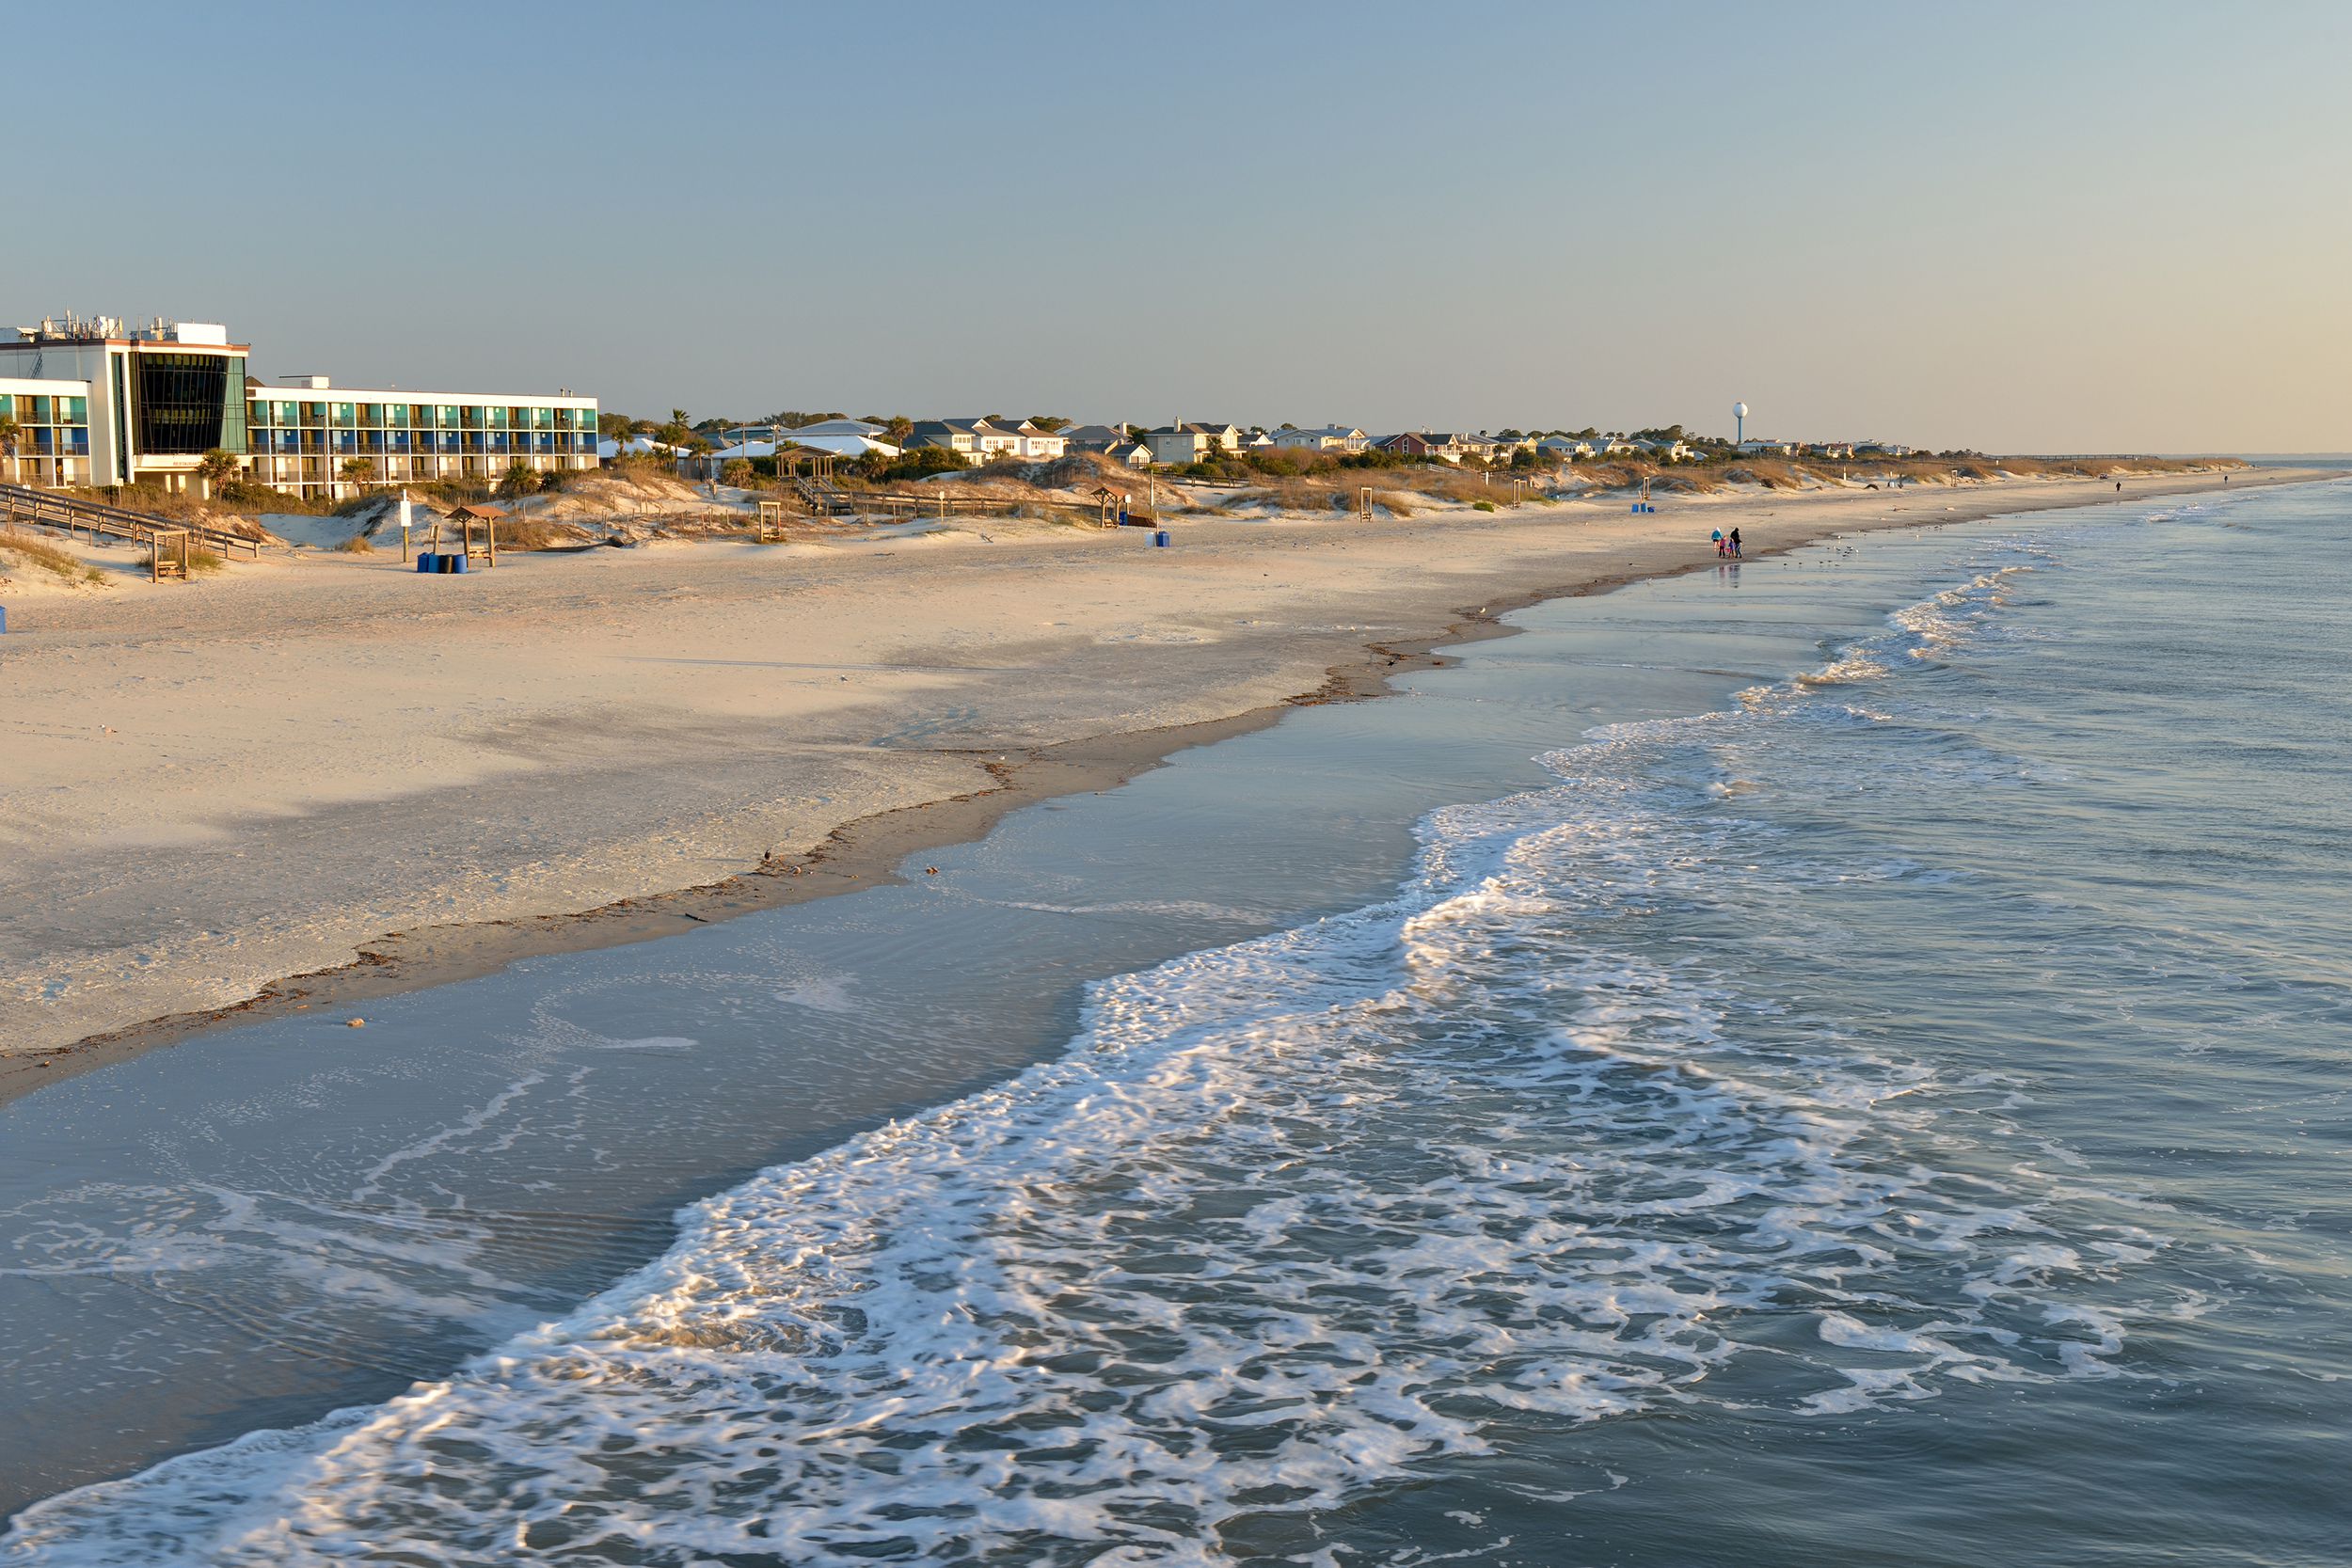 <p>Savannah is the Hostess City of the South, and its signature beach is Tybee Island — so well known for its cuisine that celebrity chef Paula Deen has a beach house there. Its nearby salt marshes teem with birds and other wildlife unique to the area.</p>